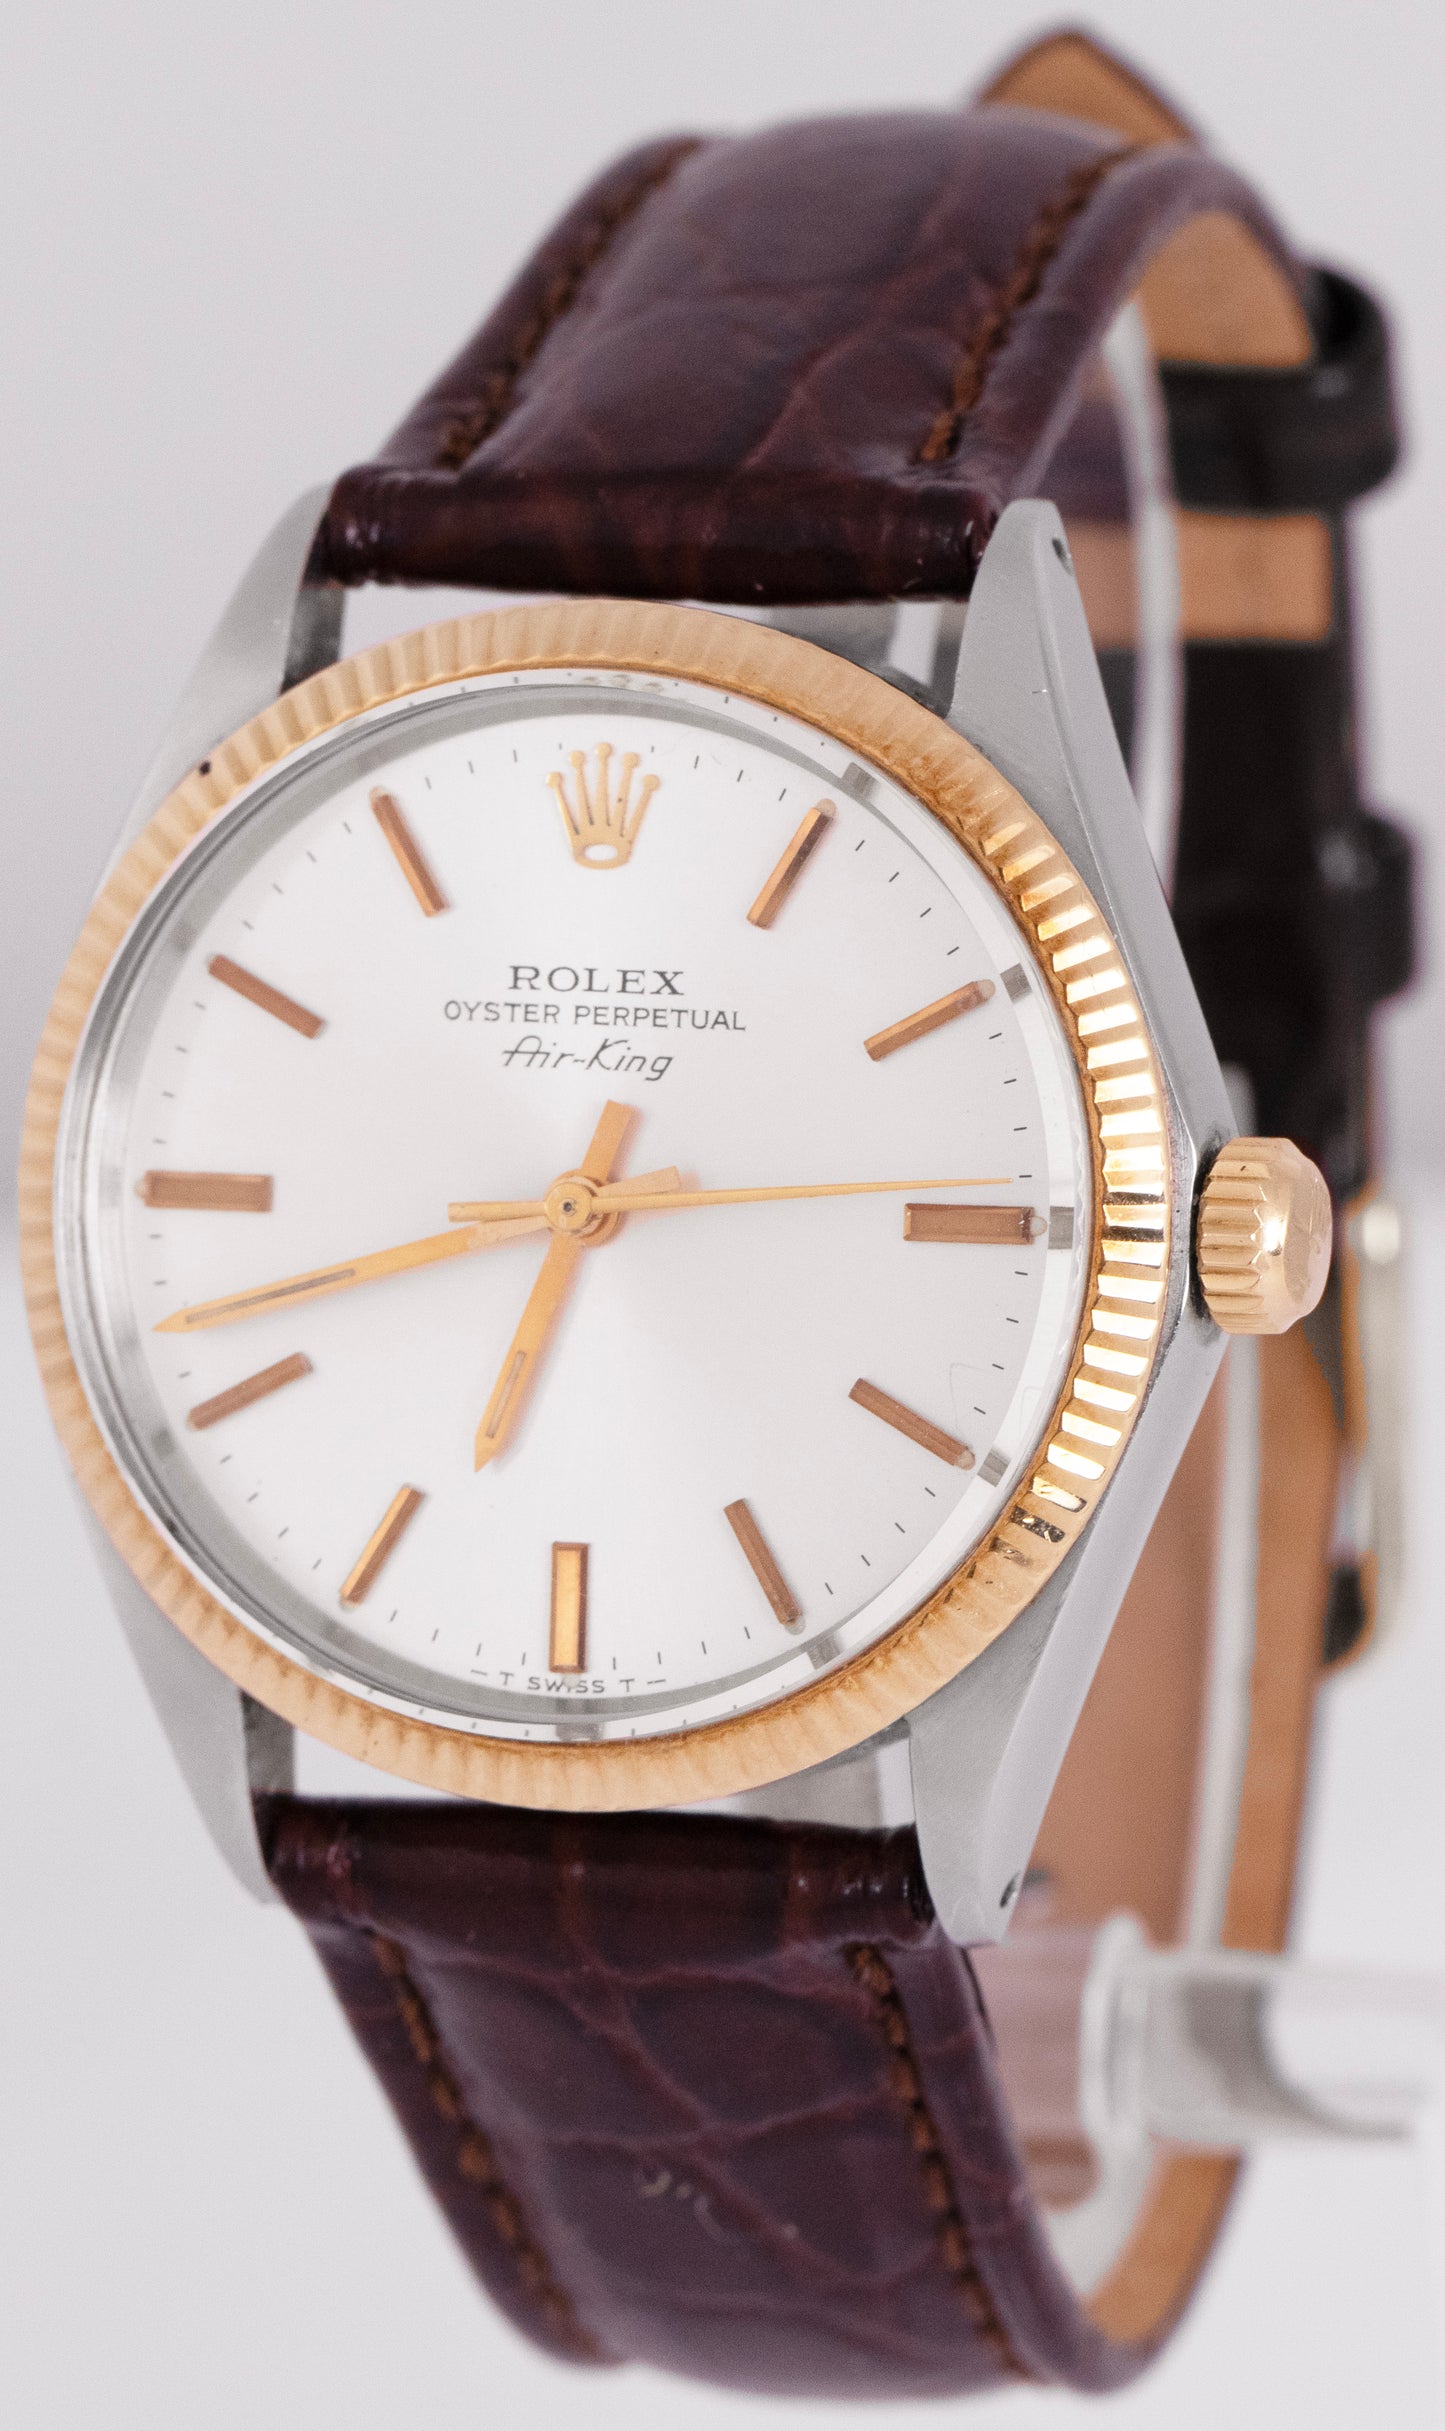 1974 Rolex Oyster Perpetual Air-King Silver 34mm Stainless Steel Gold Watch 5501